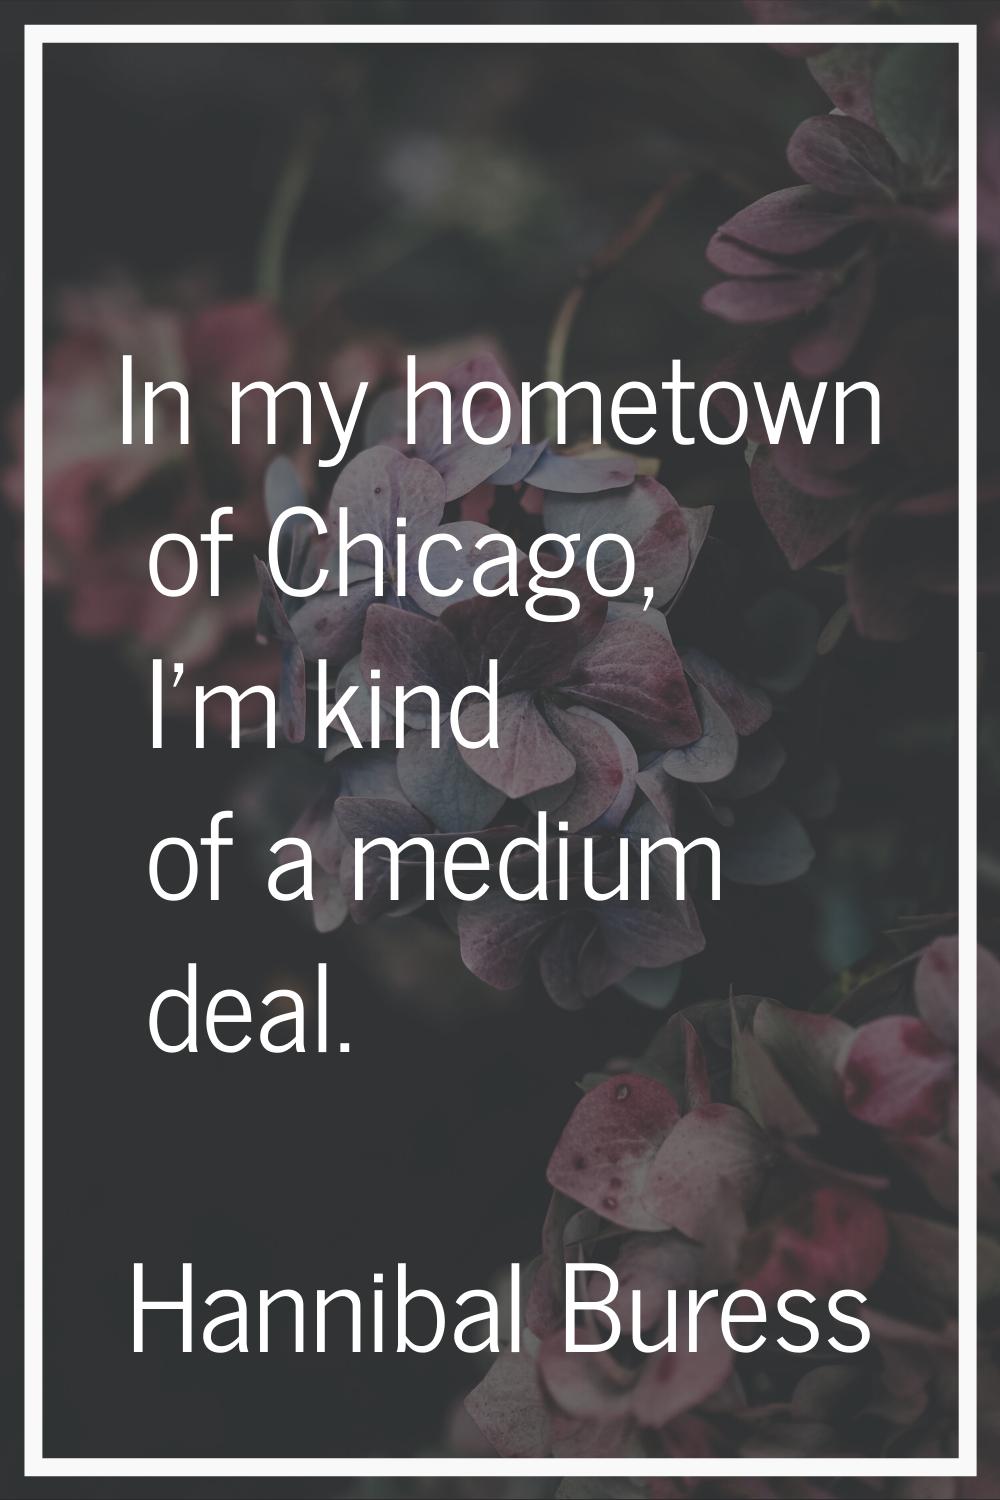 In my hometown of Chicago, I'm kind of a medium deal.